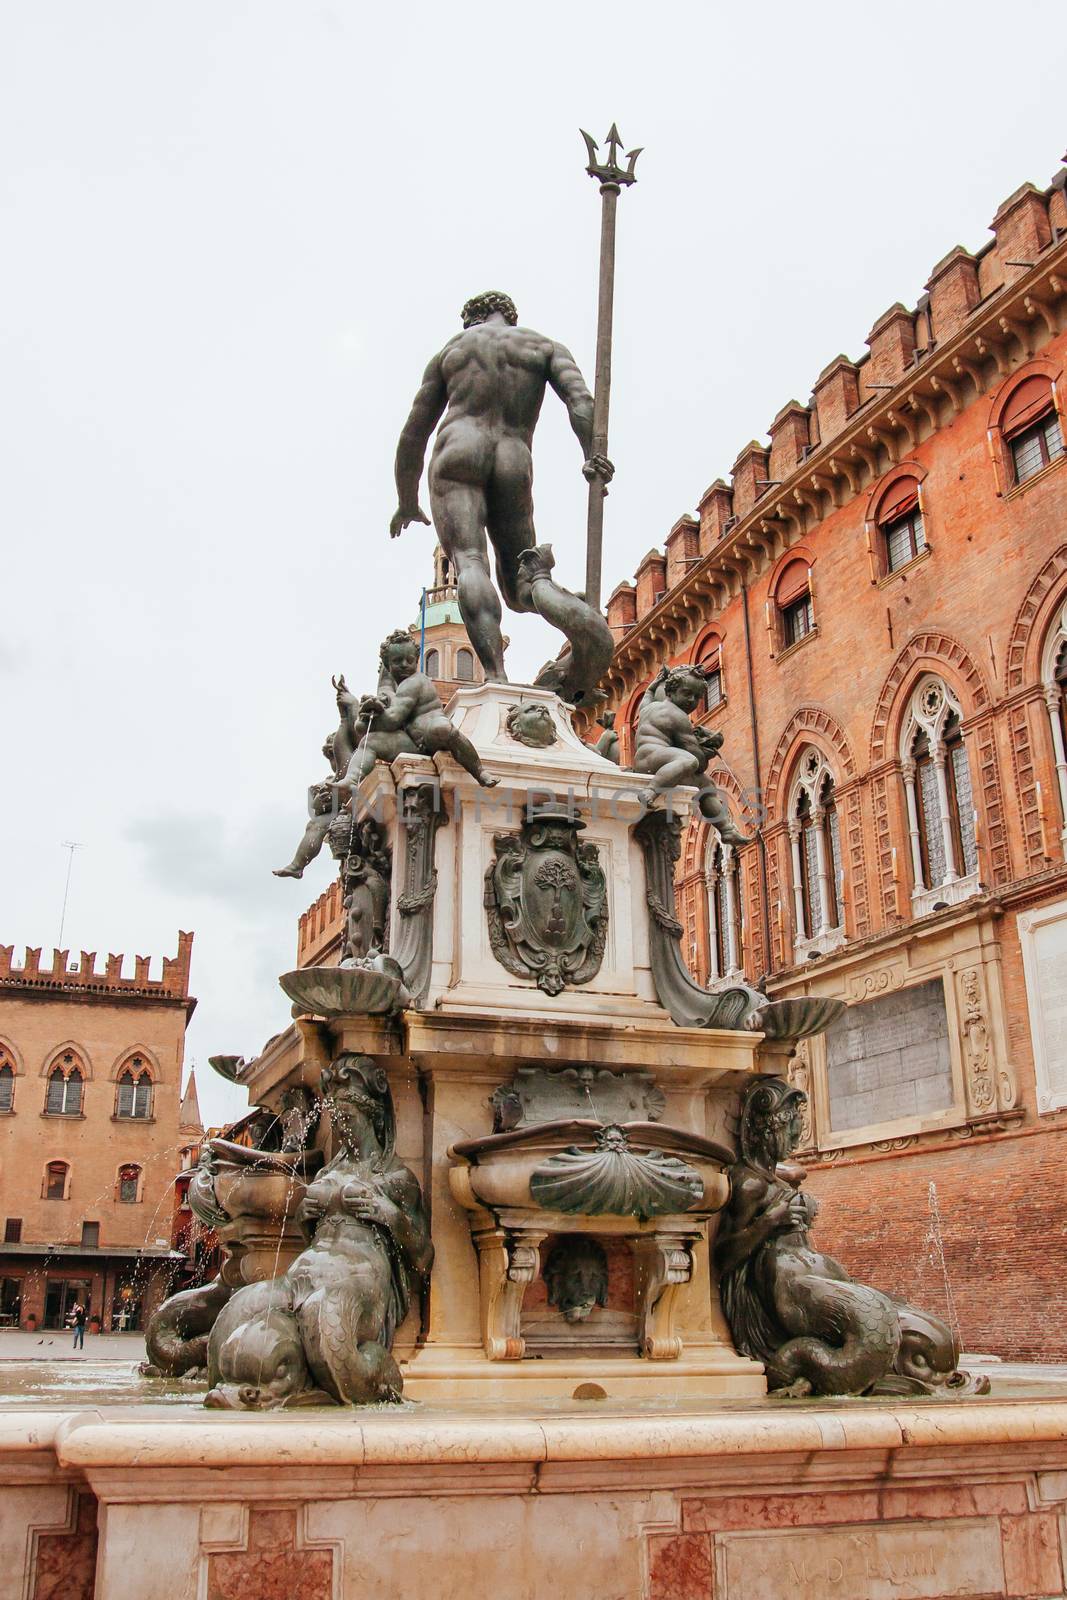 The beatiful ancient Fountain of Neptune in Bologna Italy